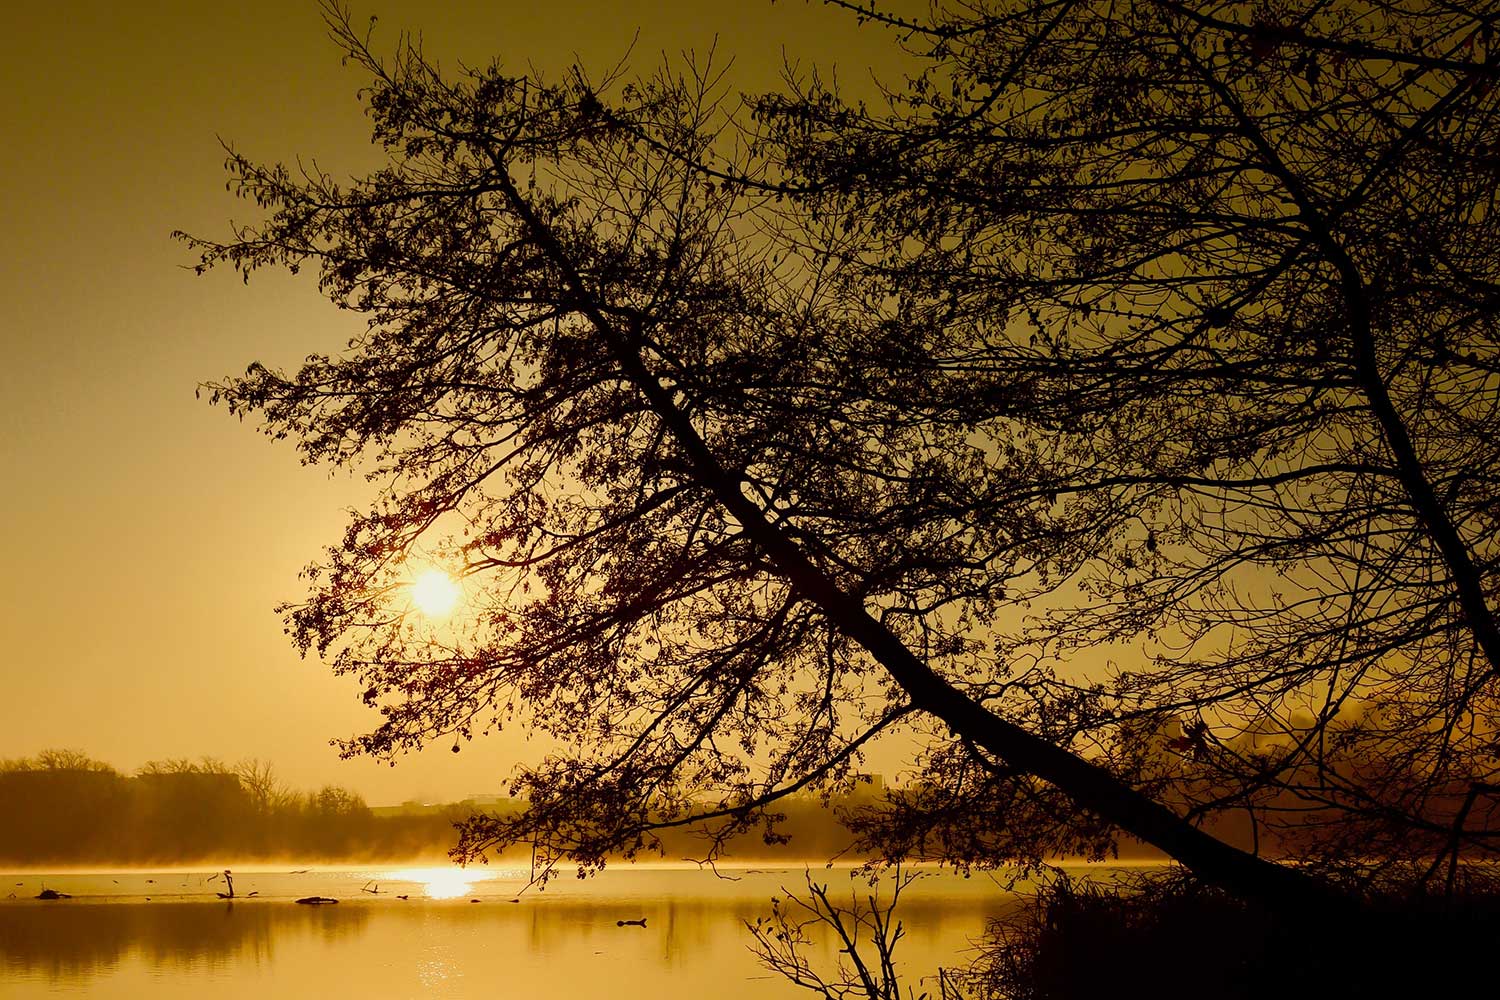 An orangish-yellow sky with the sun setting over water with trees in the foreground.